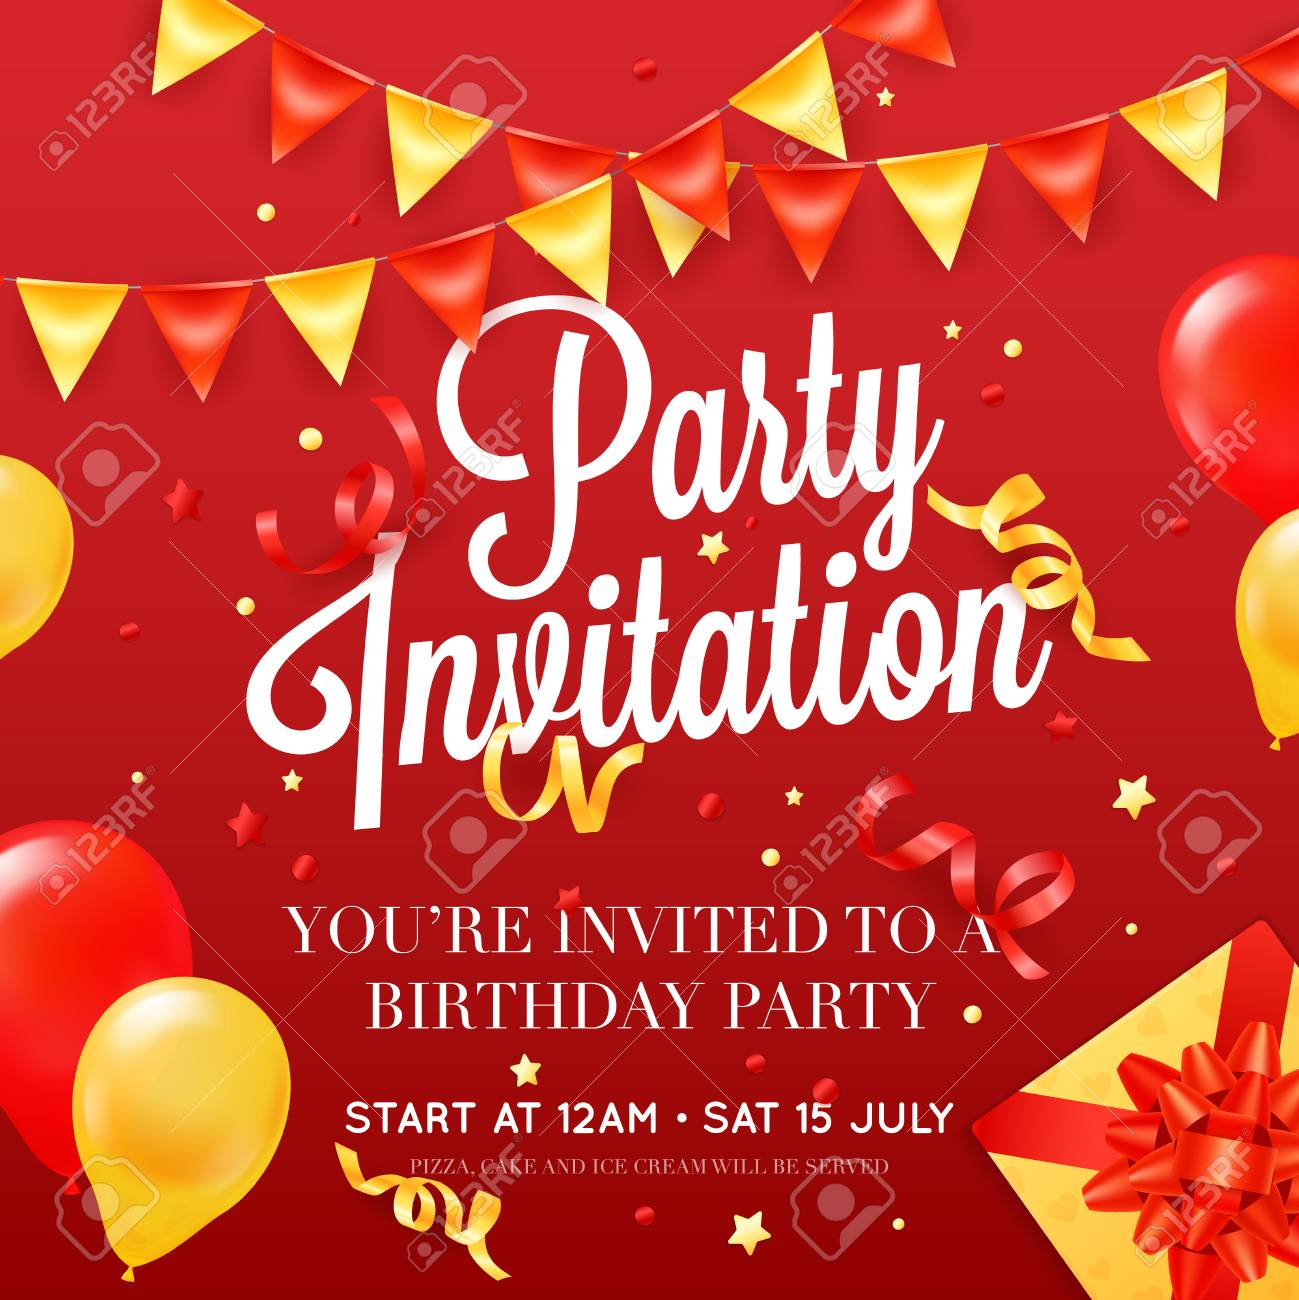 Birthday Party Invitation Card Poster Template With Ceiling Balloon intended for sizing 1299 X 1300